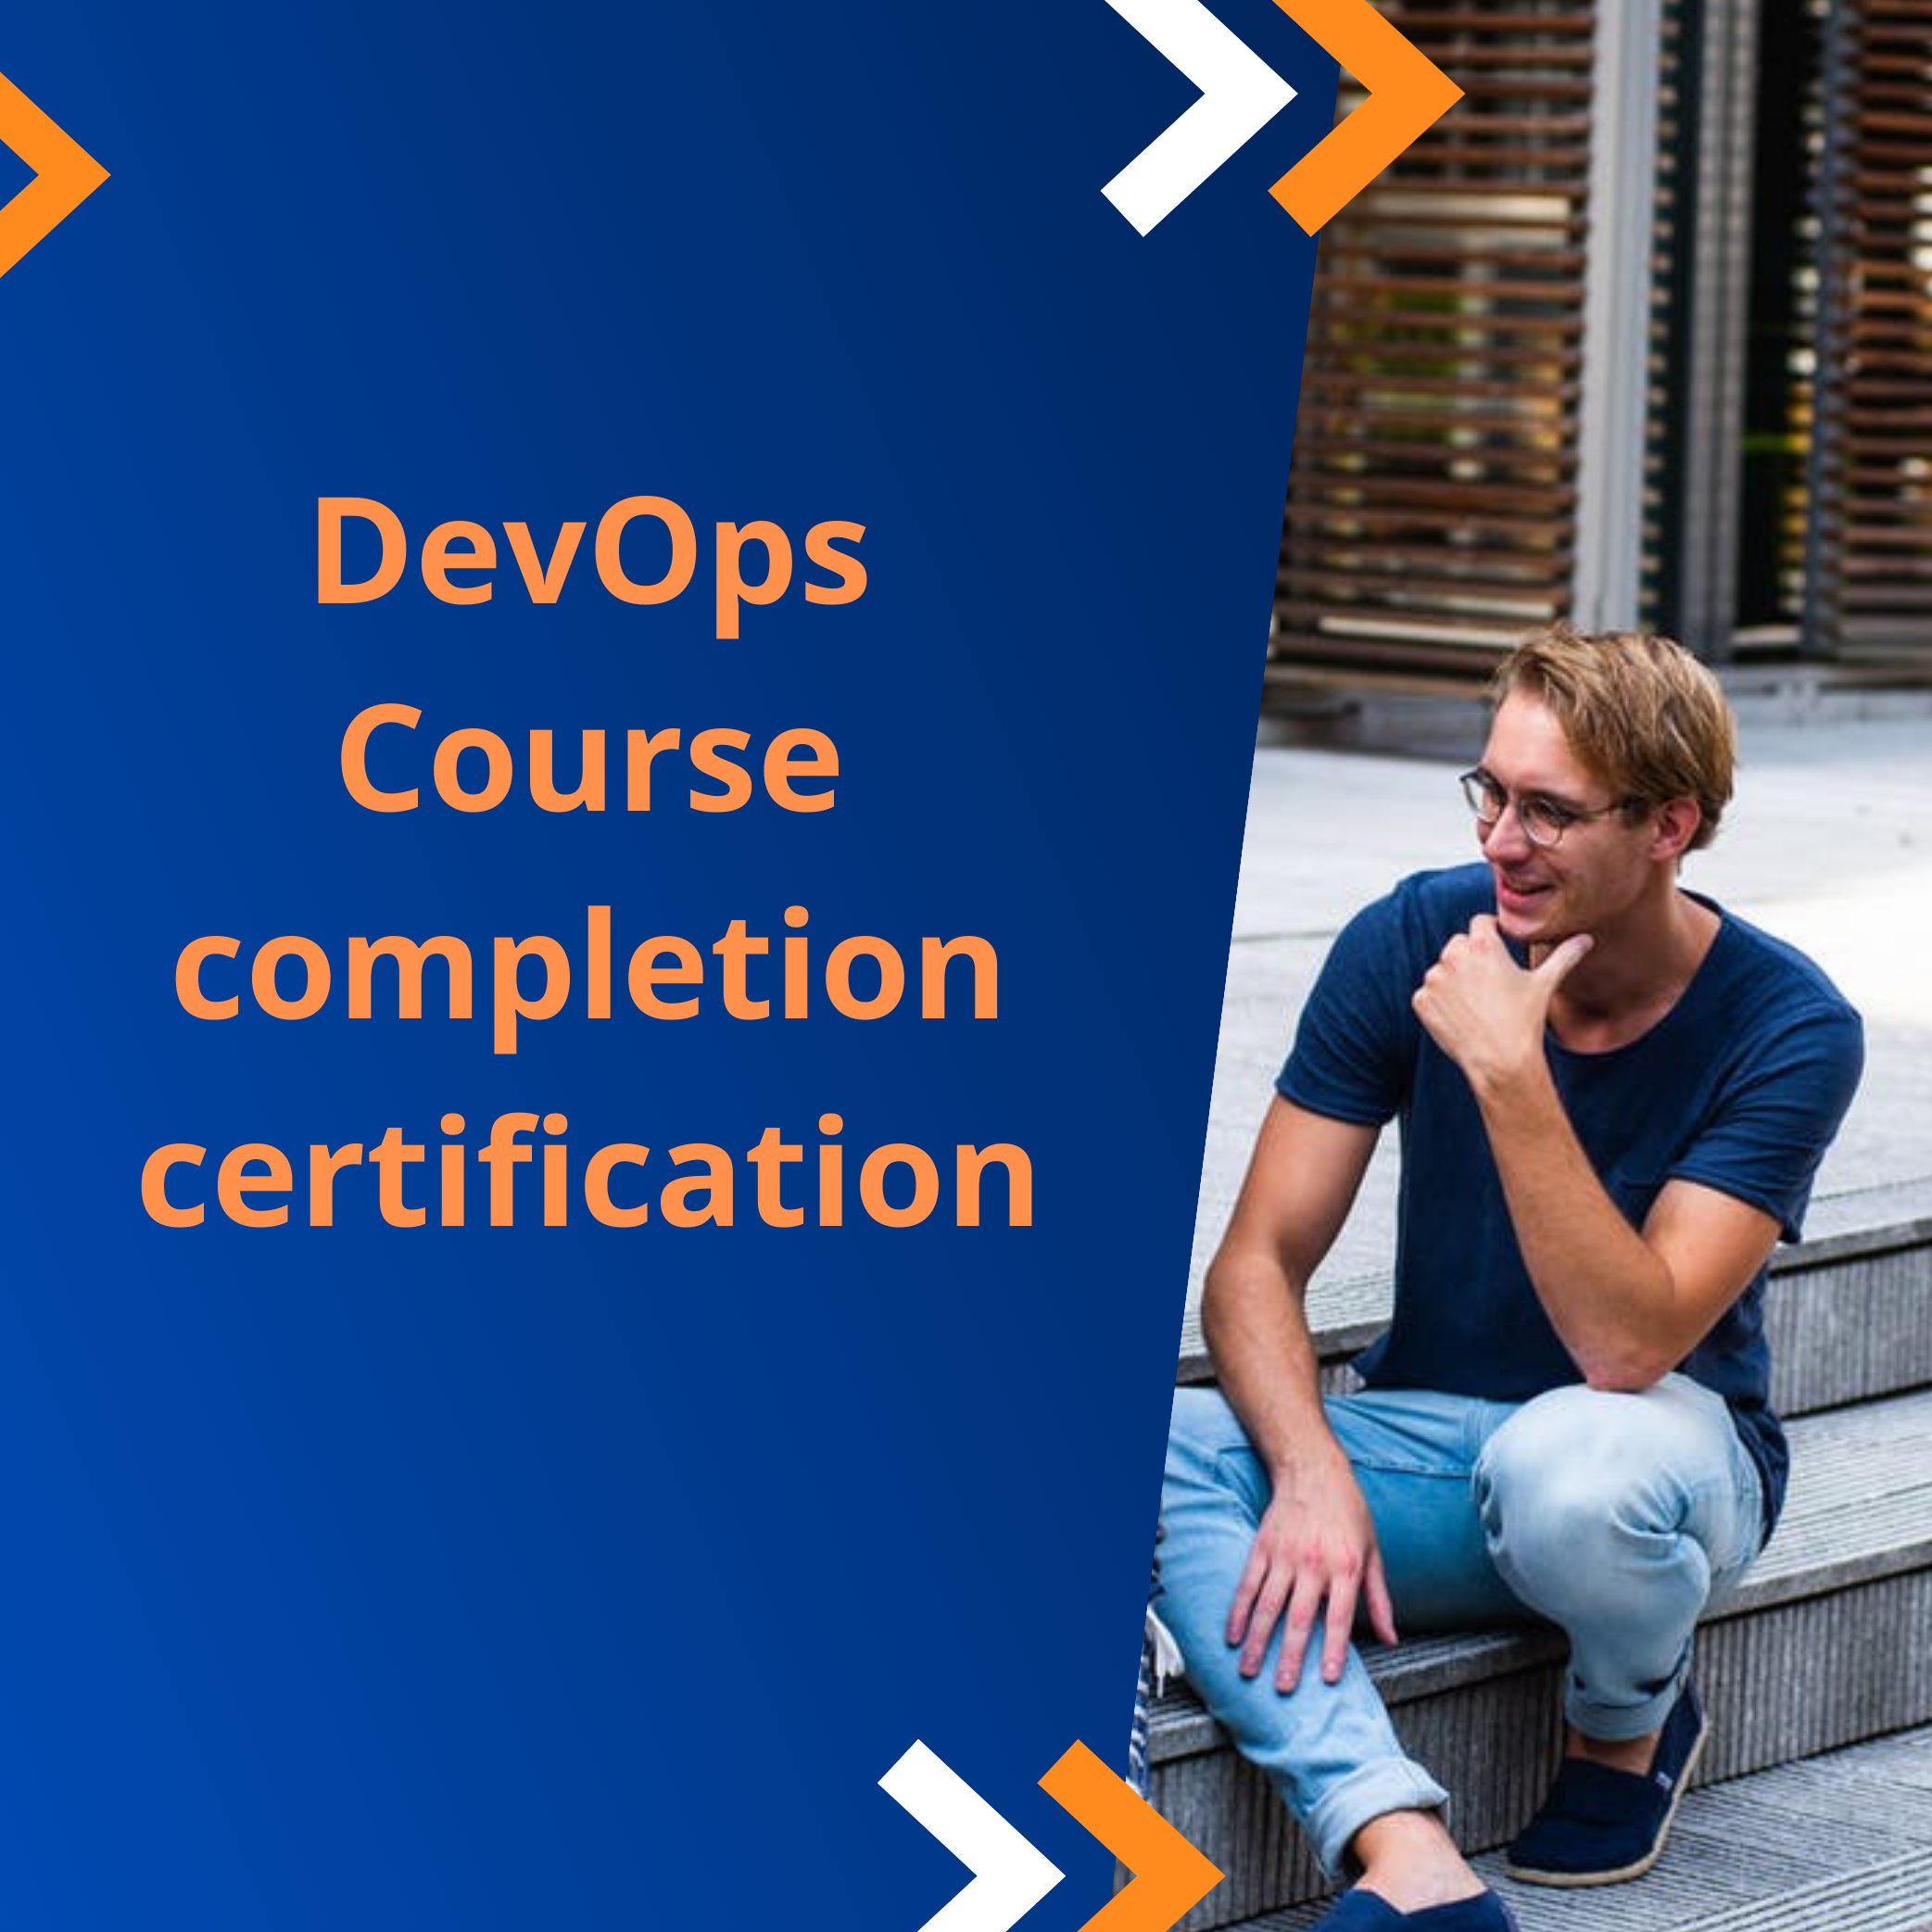 DevOps Training For Programmers and IT Employees